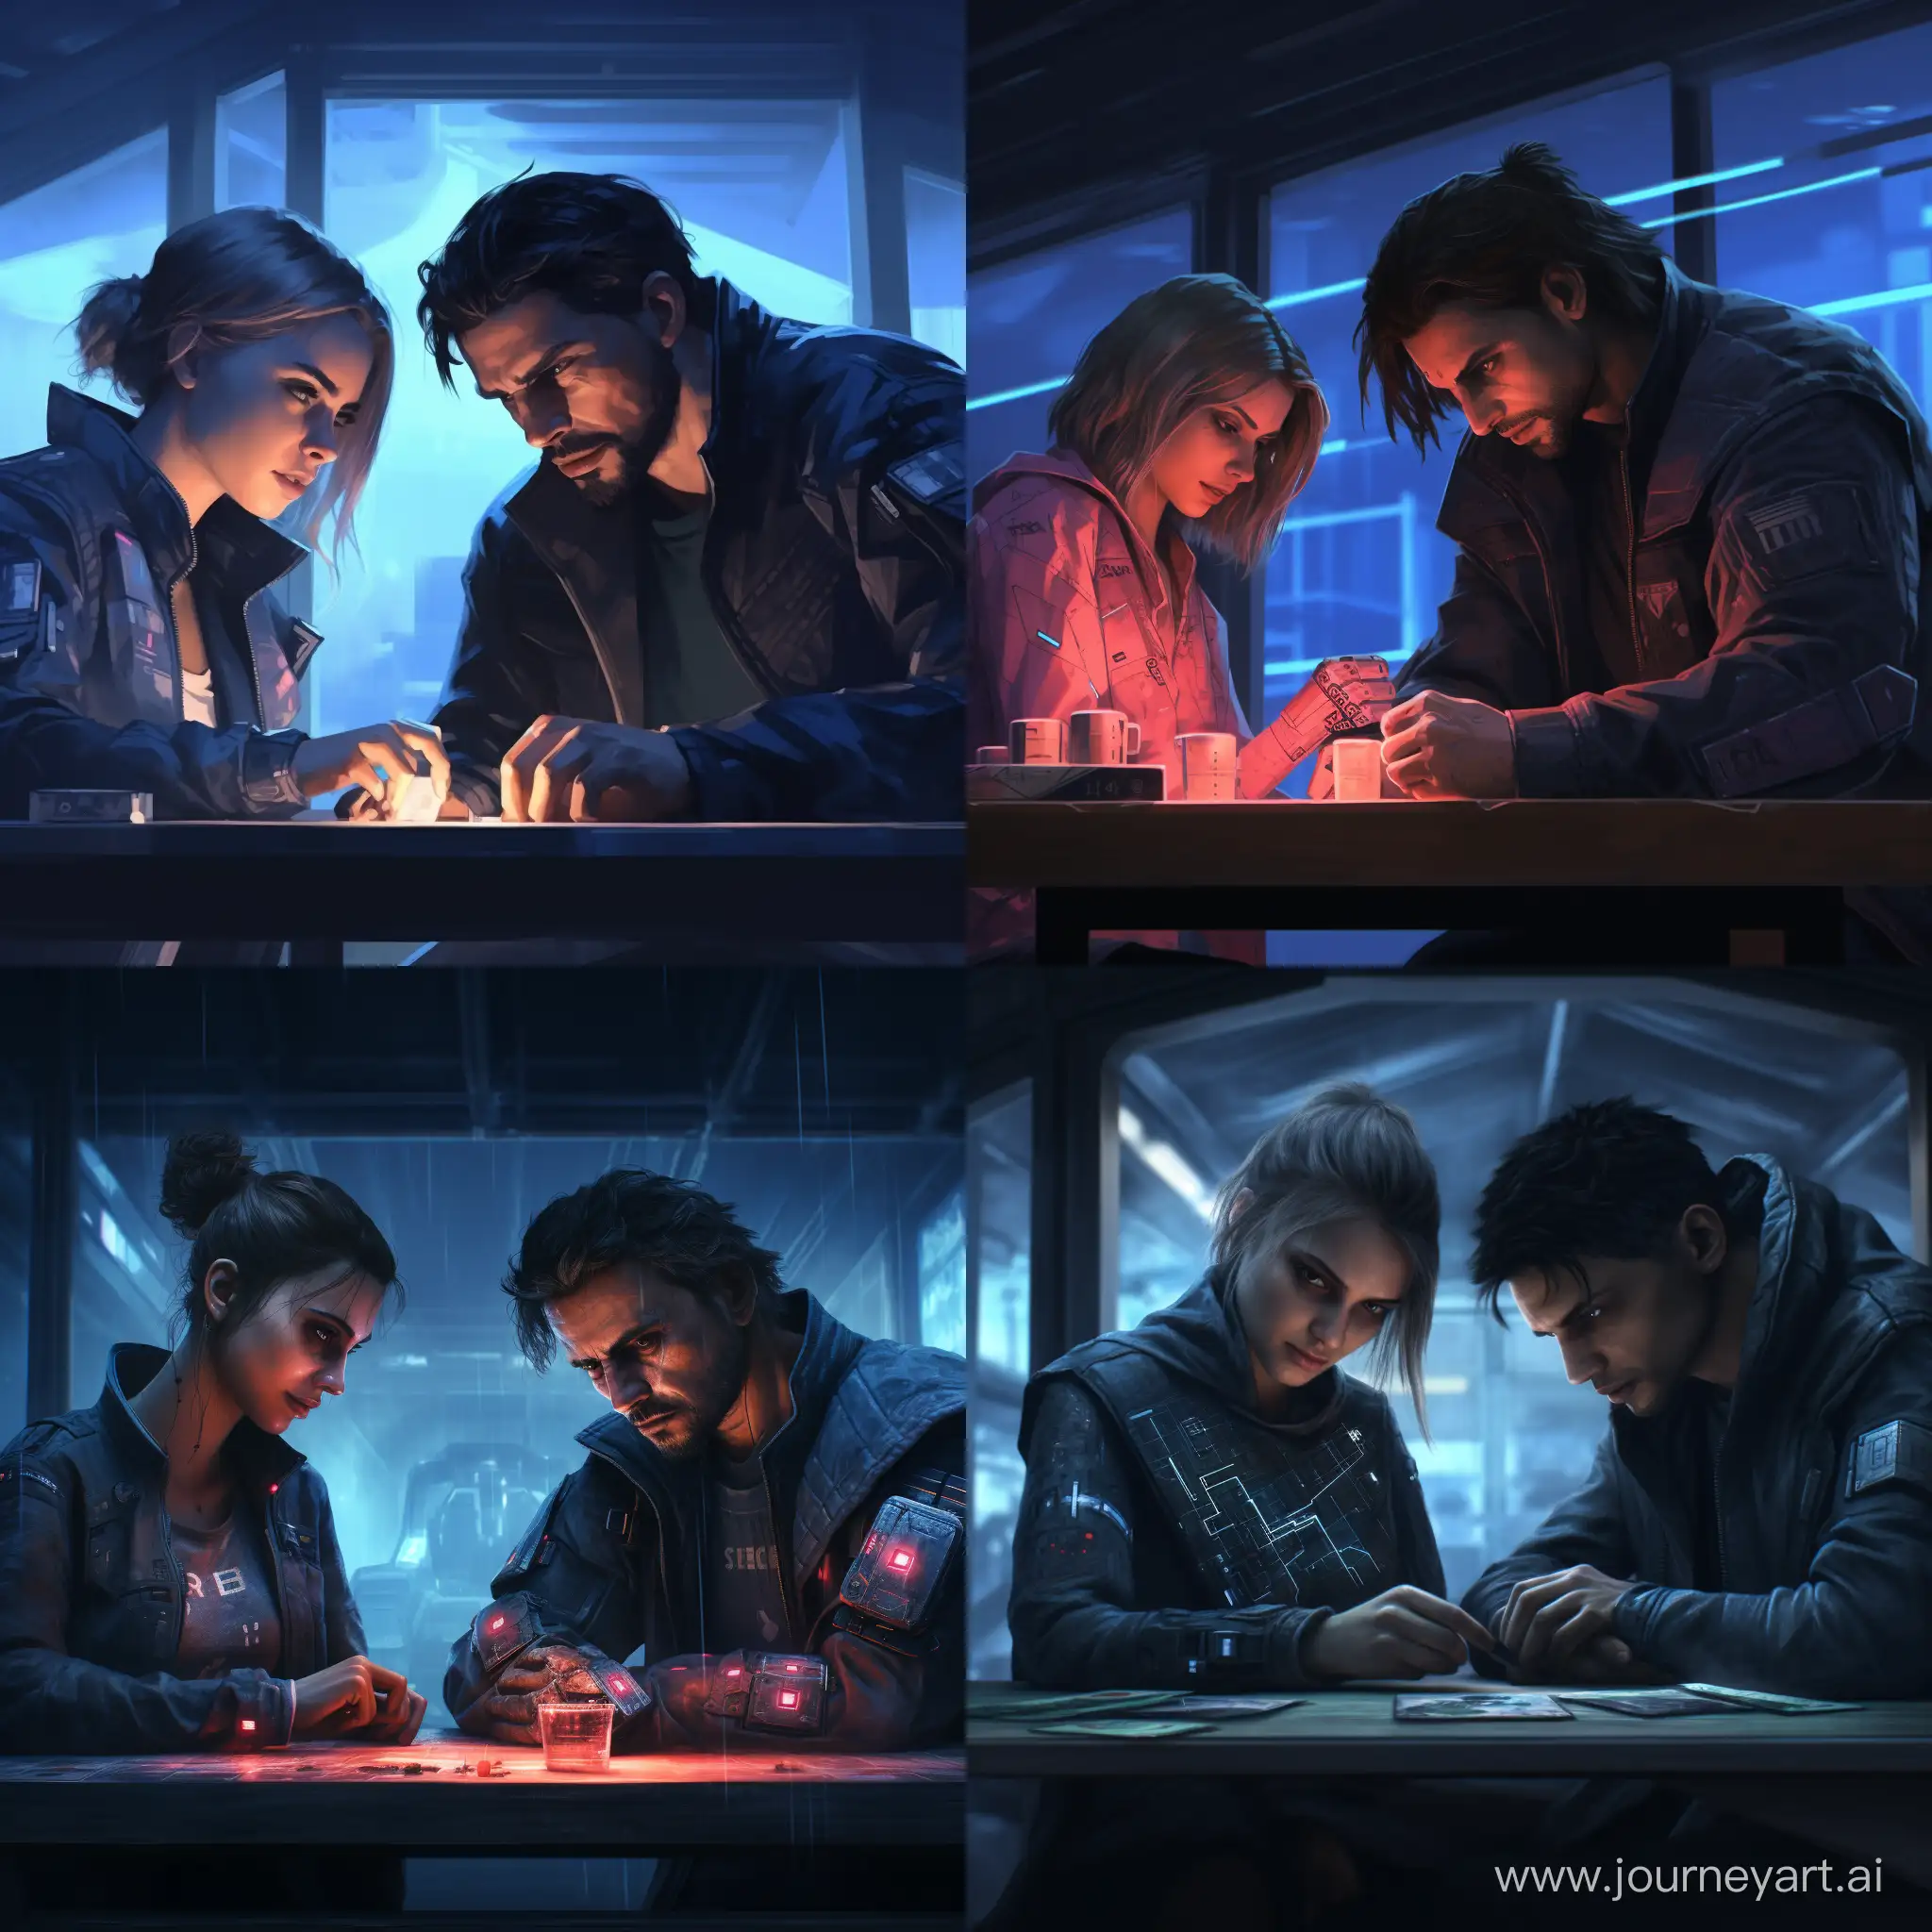 a girl and a guy are sitting at a table and playing, playing cards are on the table, a cyberpunk image